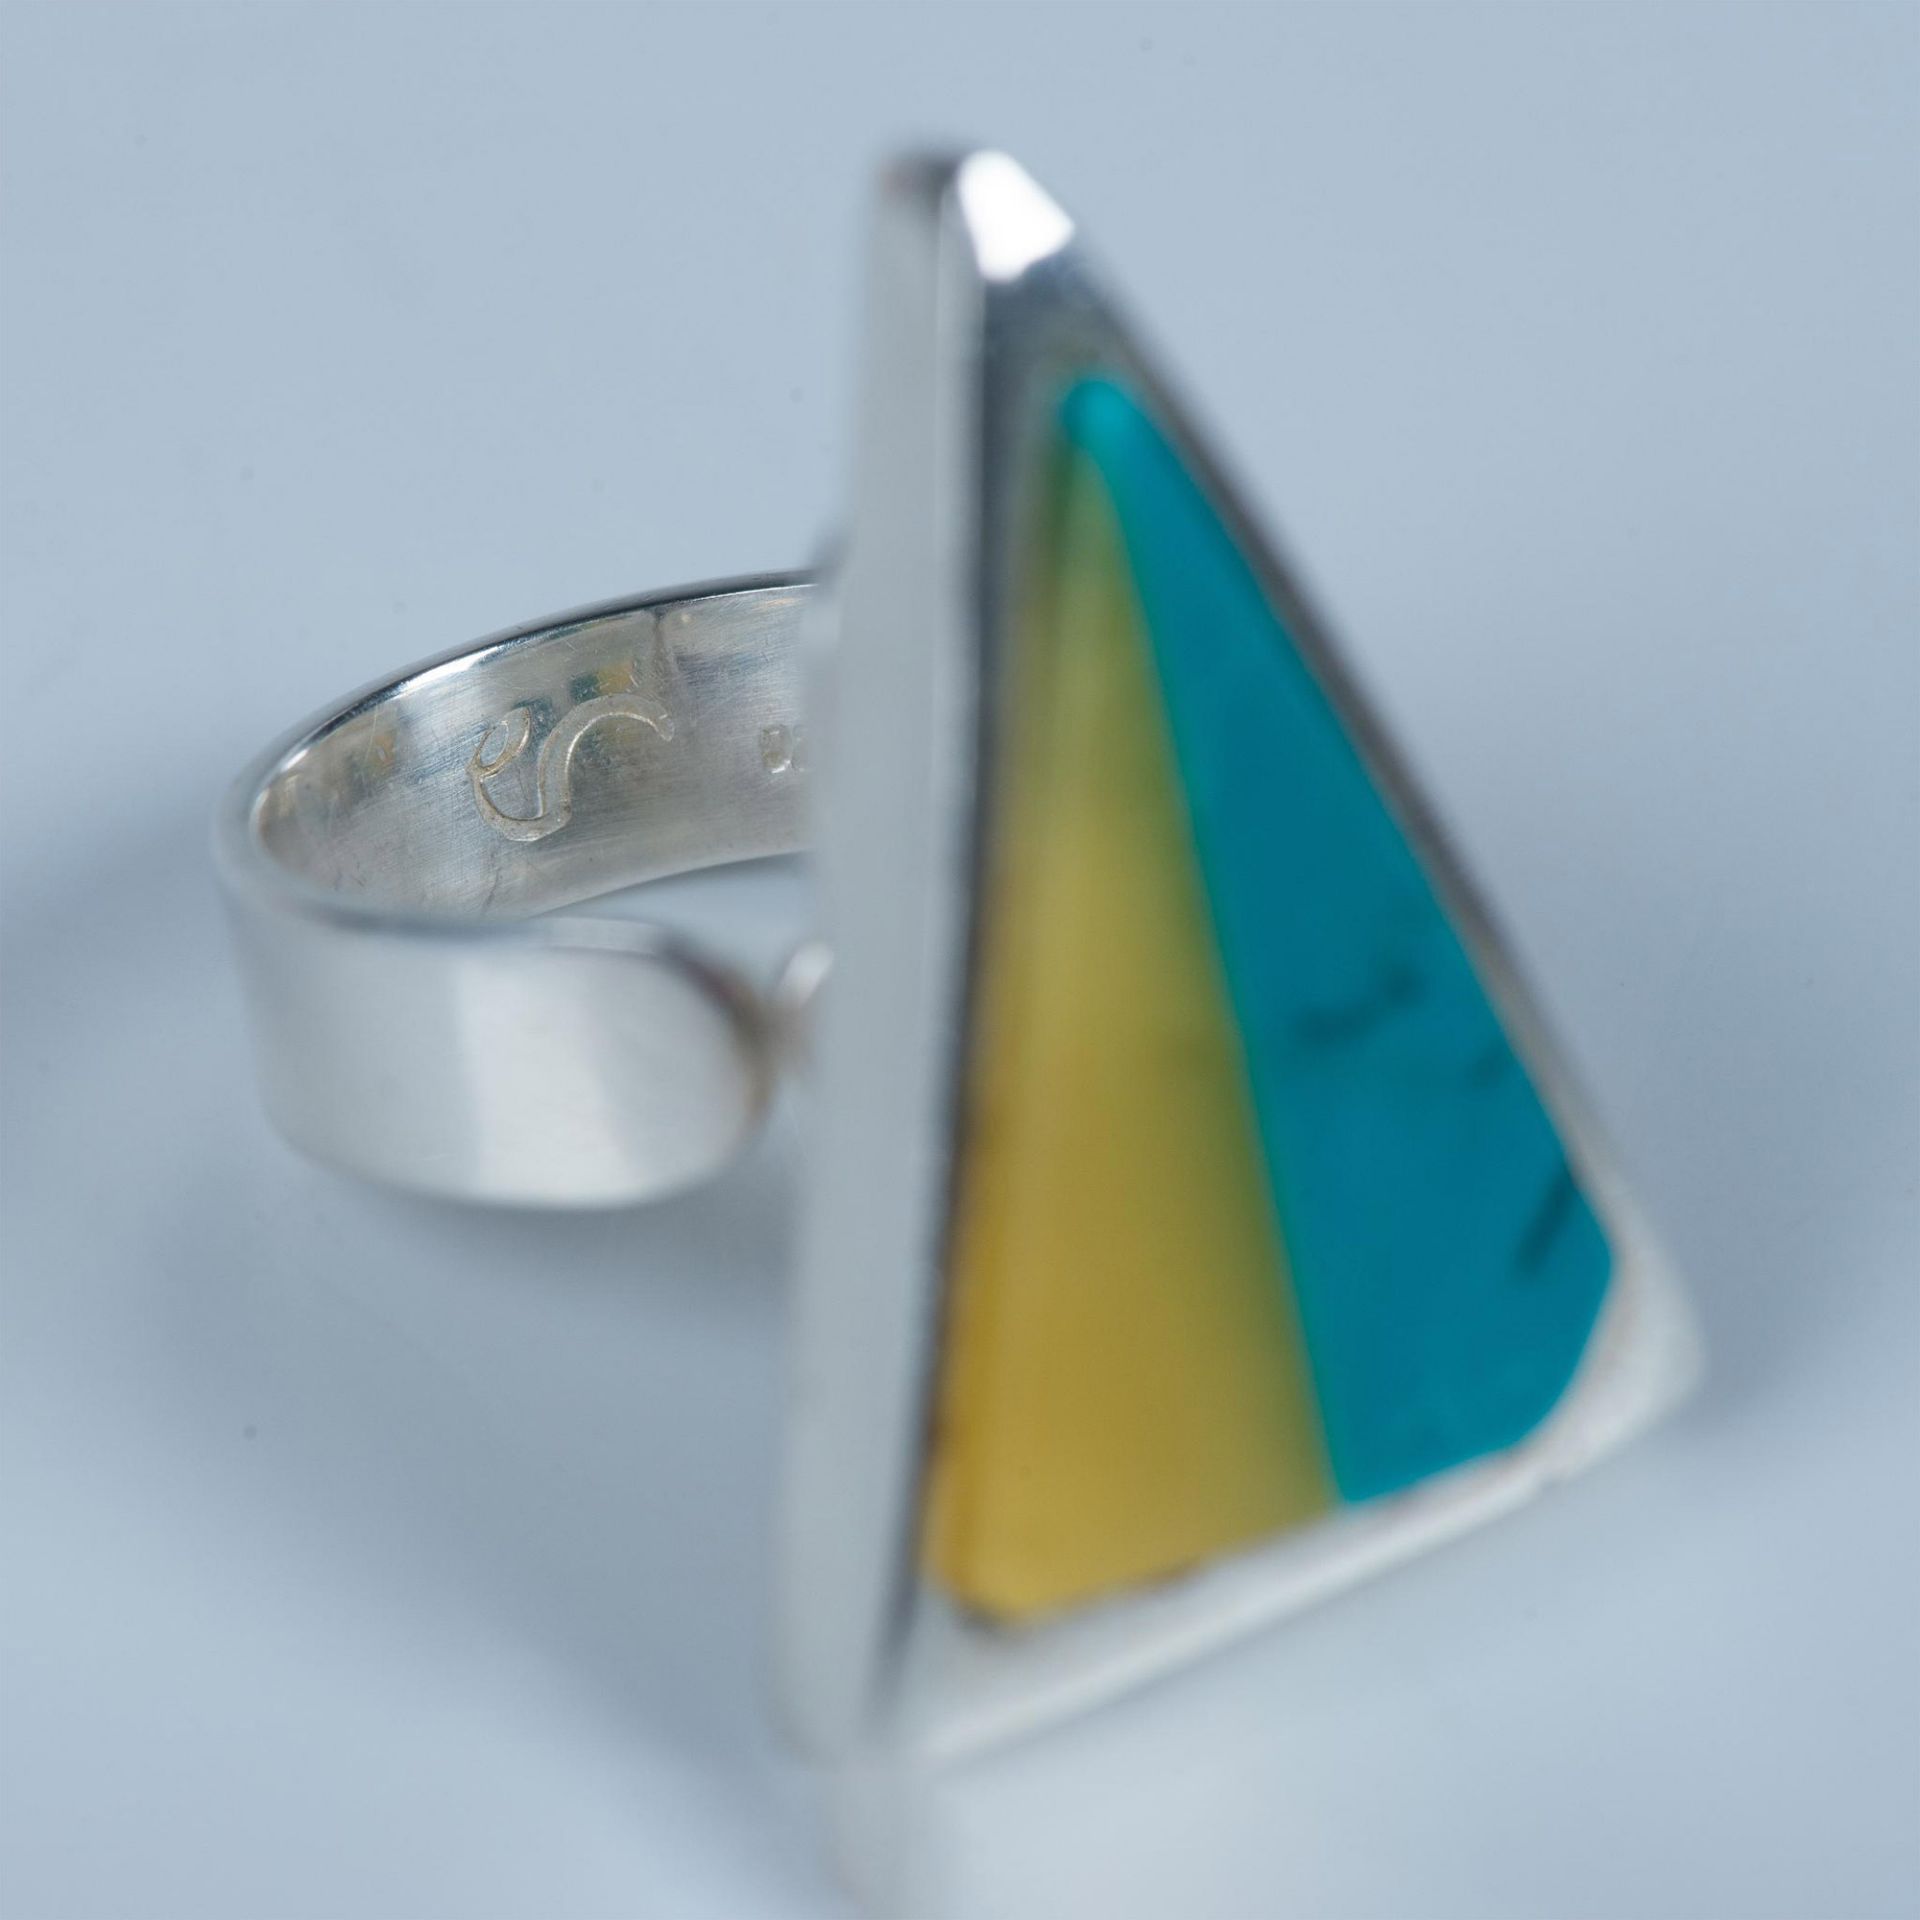 Contemporary Sterling Silver, Baltic Amber & Turquoise Ring - Image 3 of 6